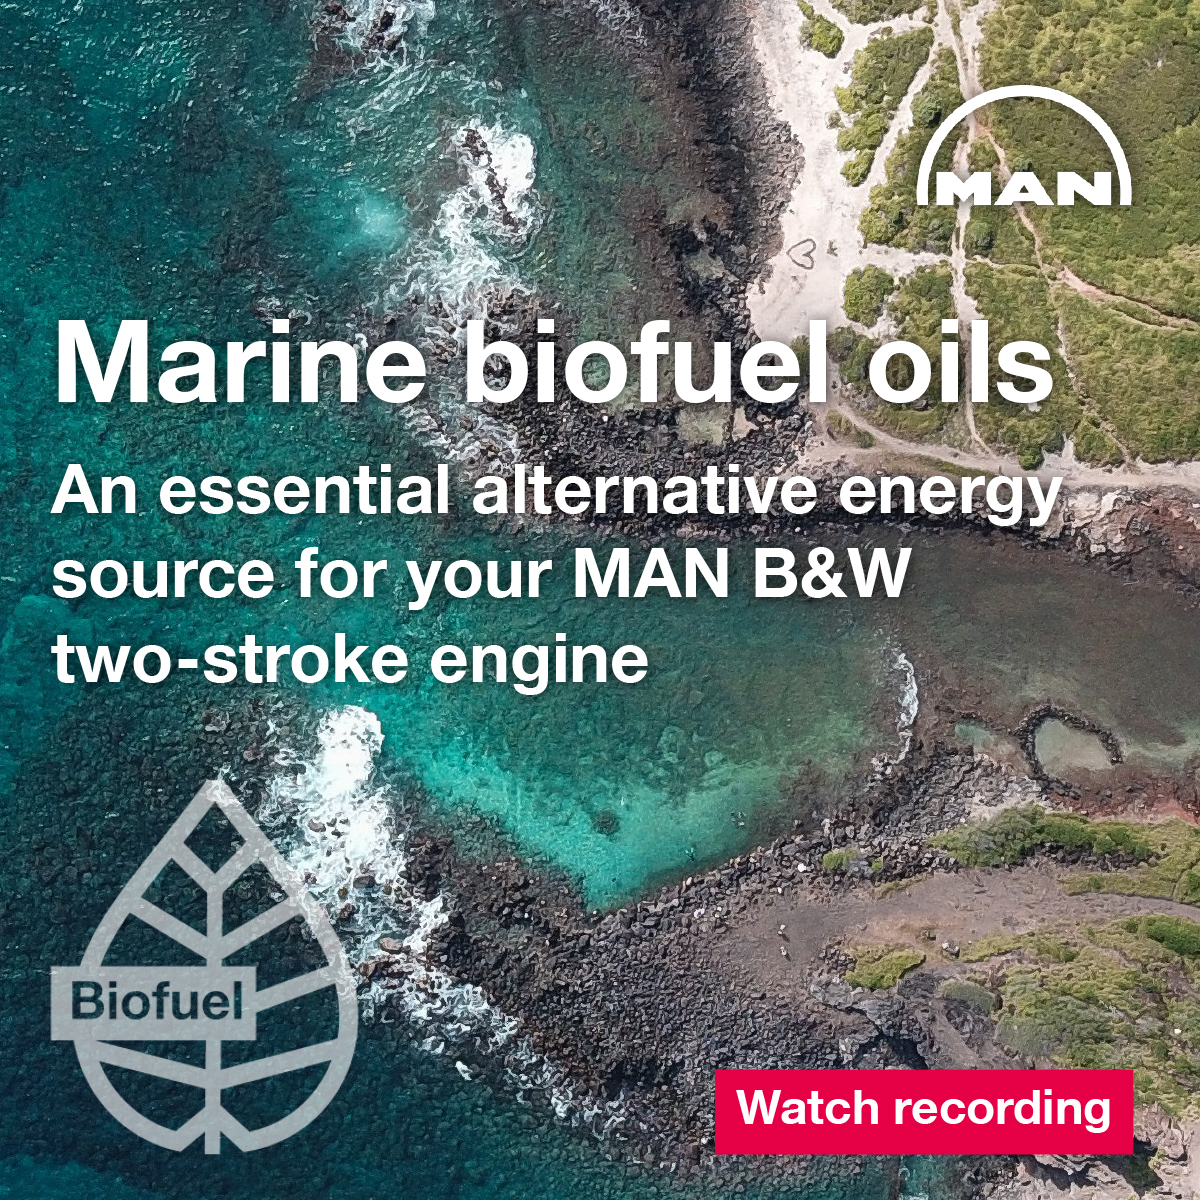 Did you miss our two-stroke MAN ExpertTalk on marine biofuel oils - a group of fuel oils made from predominantly plant-based energy sources? Watch the recording: ow.ly/H5ZW50QNsm2 #biofuels #twostroke #manbw #marine